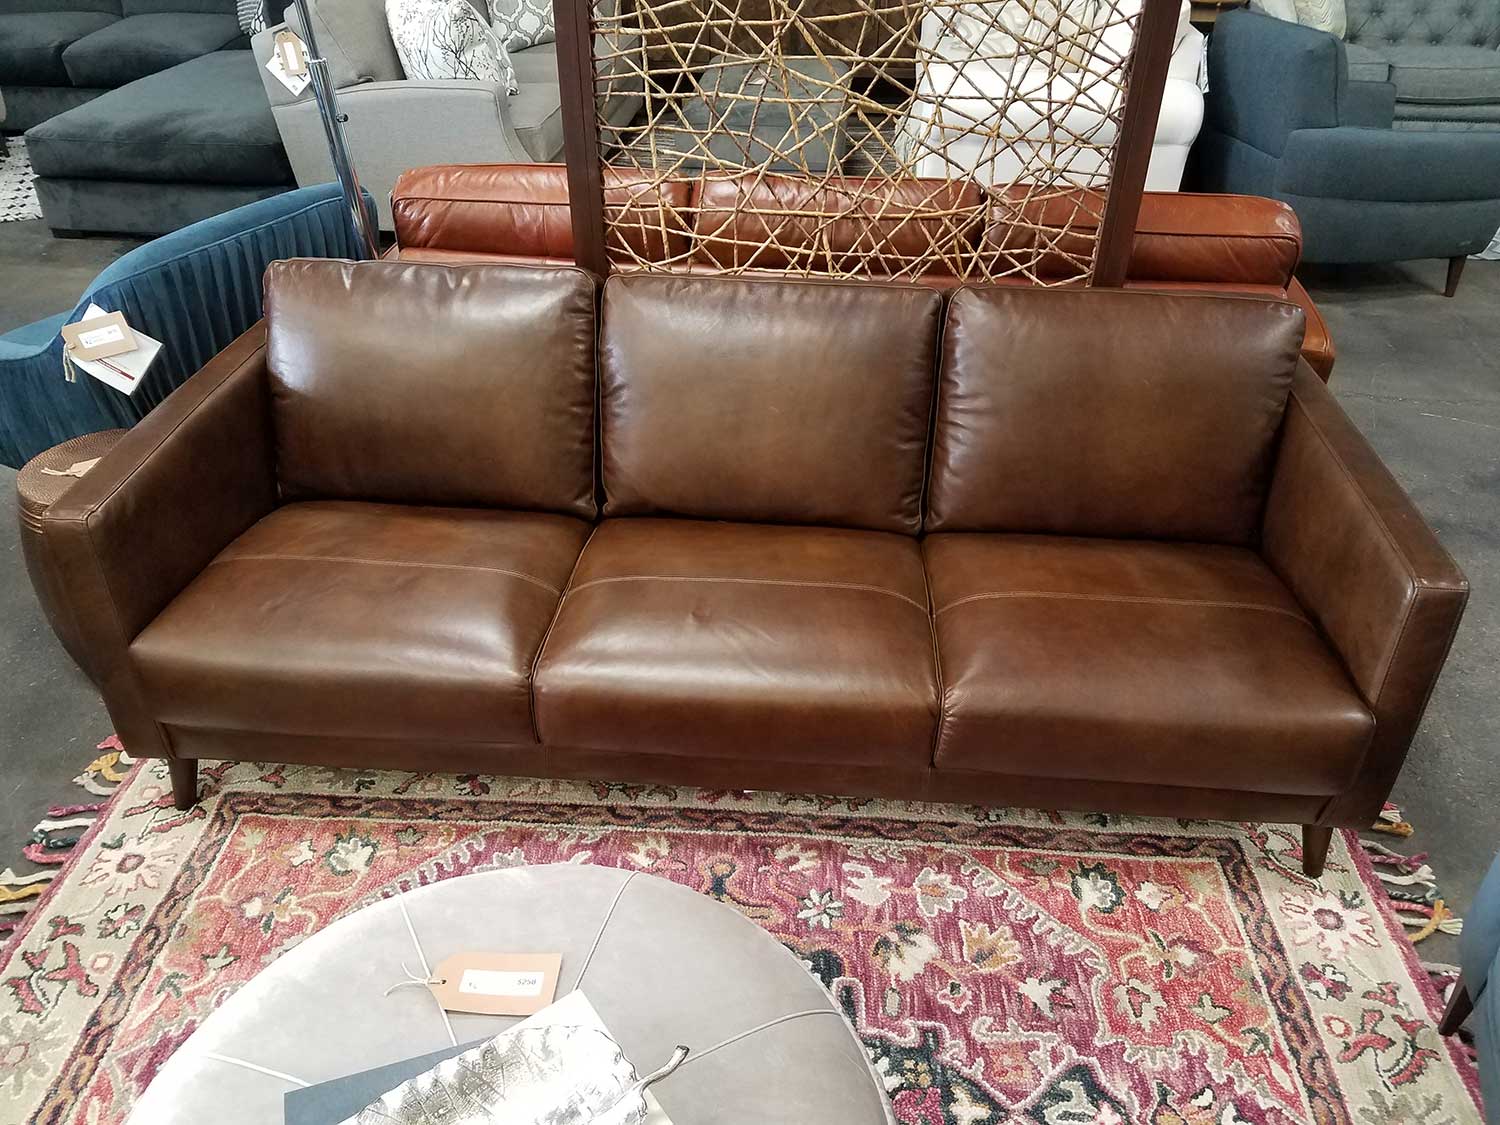 high quality leather sofa 80 inches